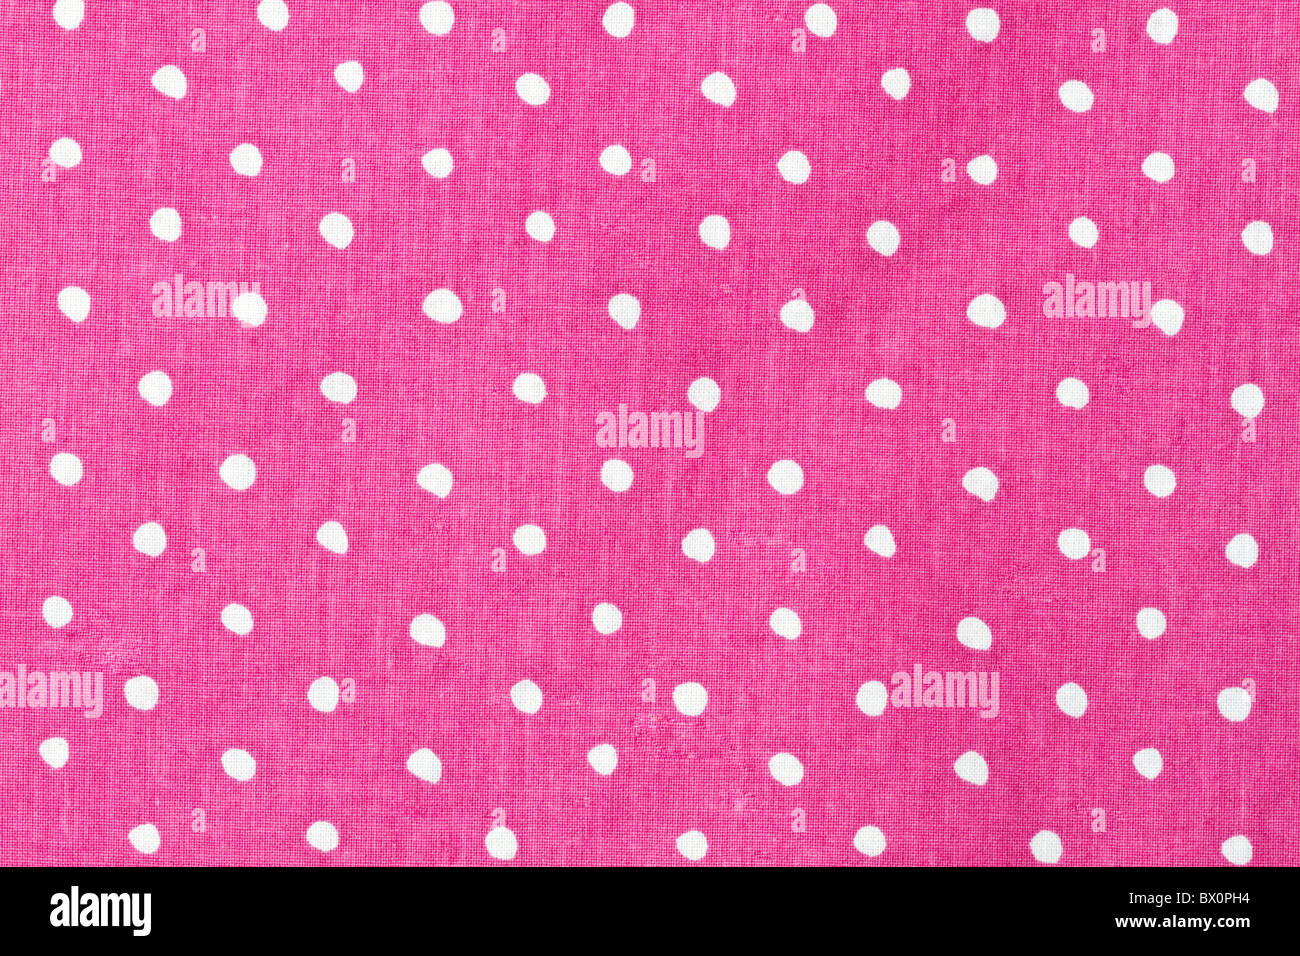 Pink and white dots fabric background Stock Photo